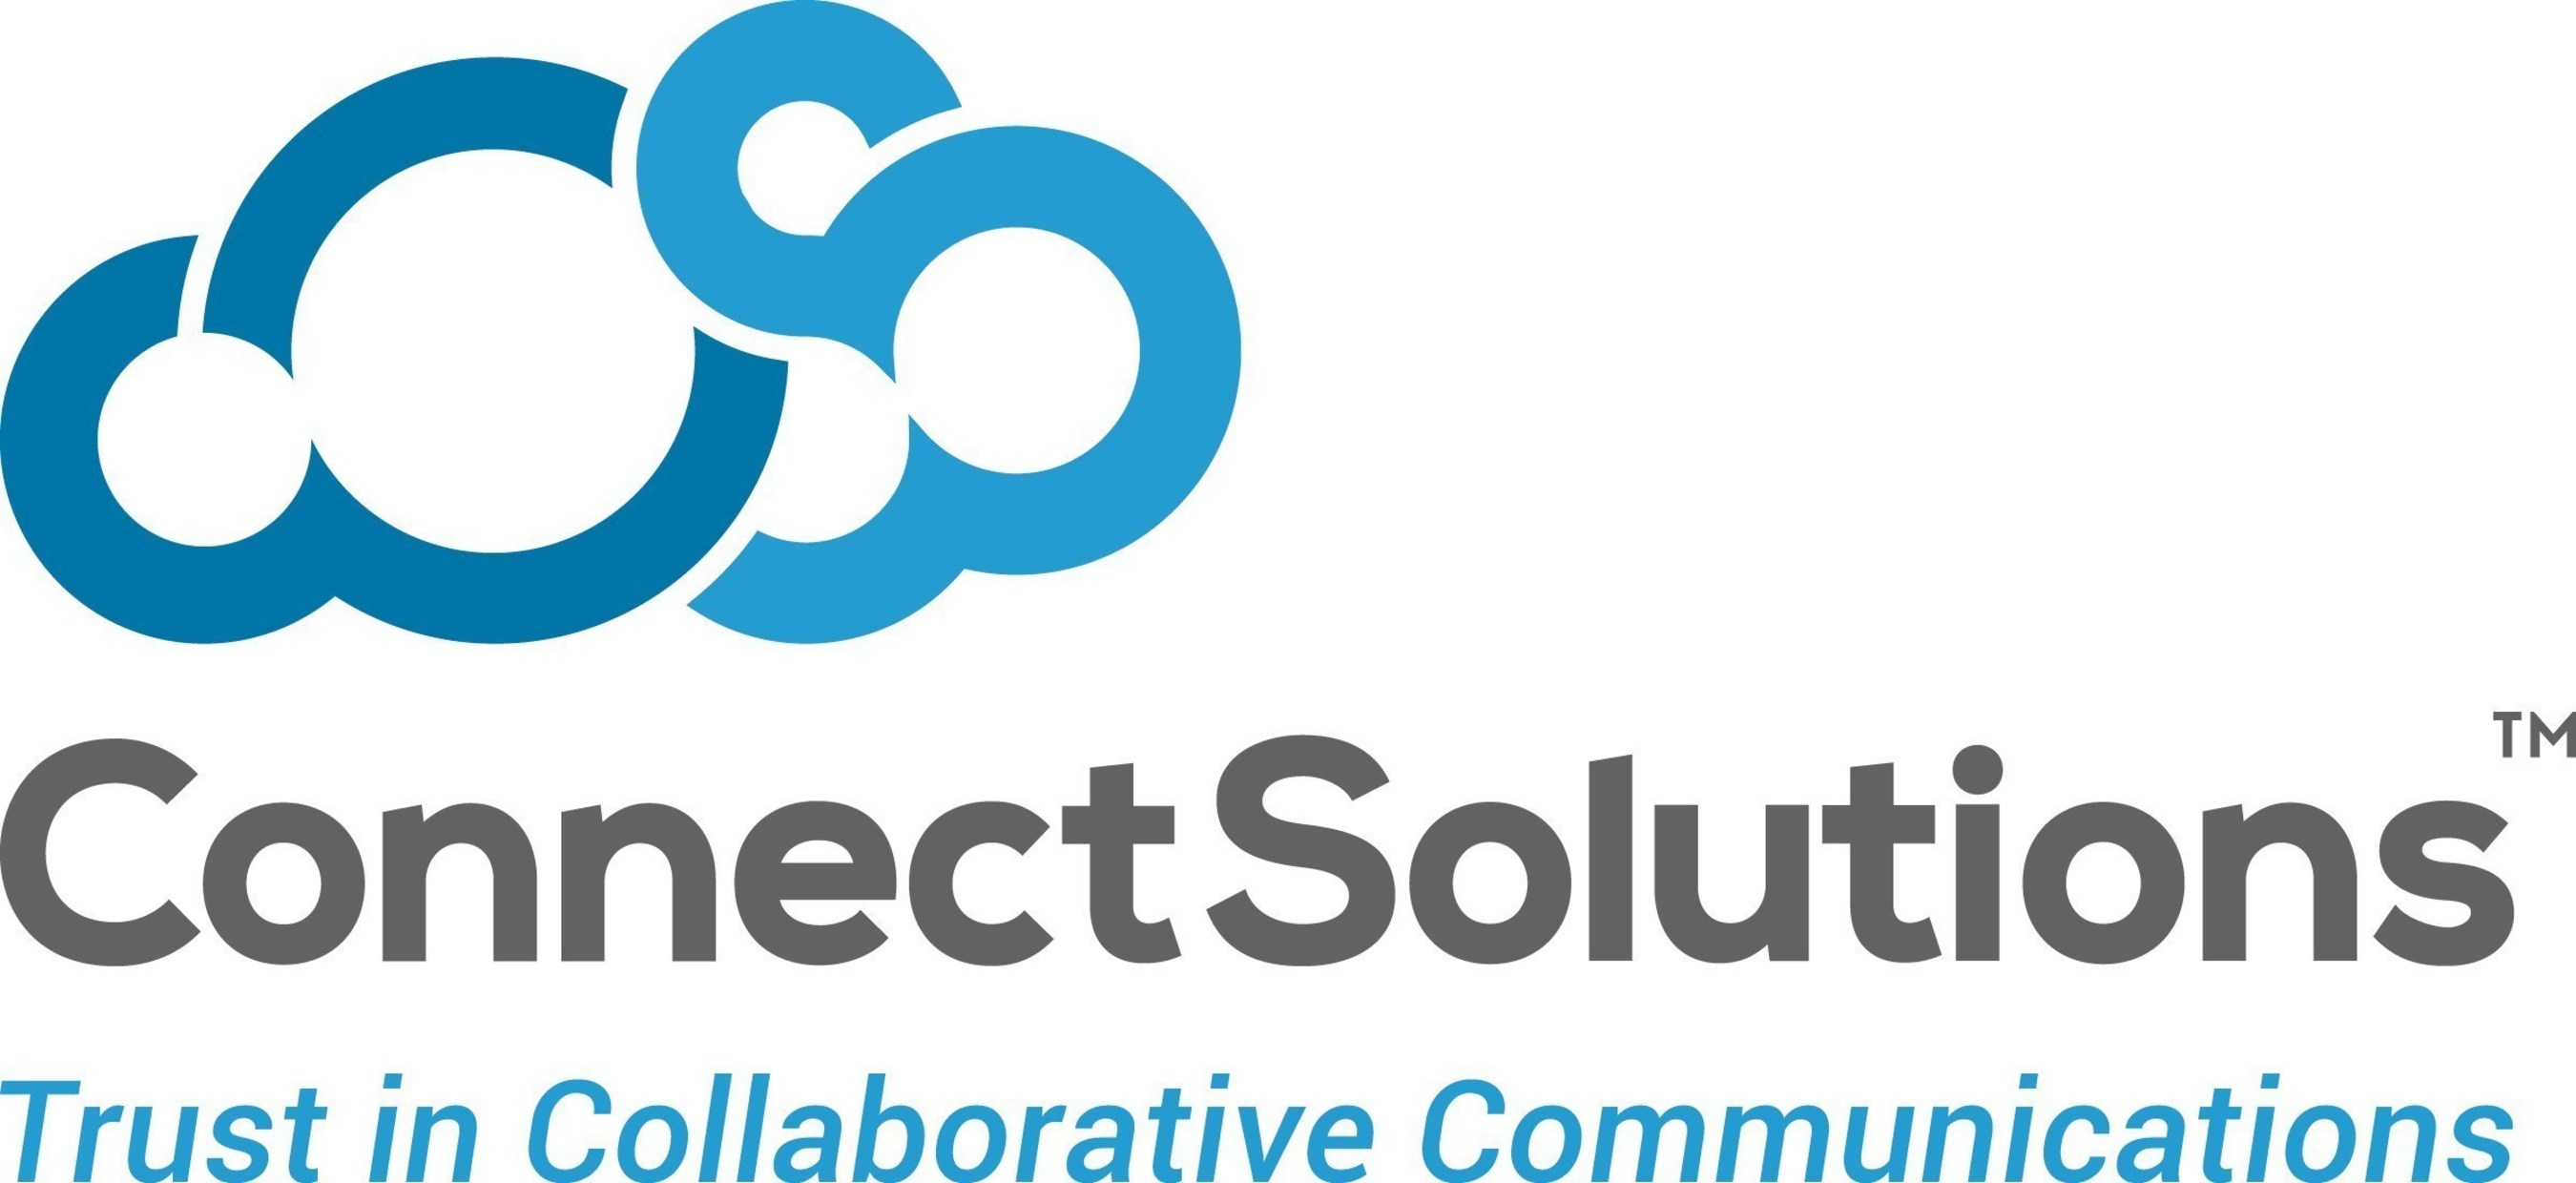 ConnectSolutions